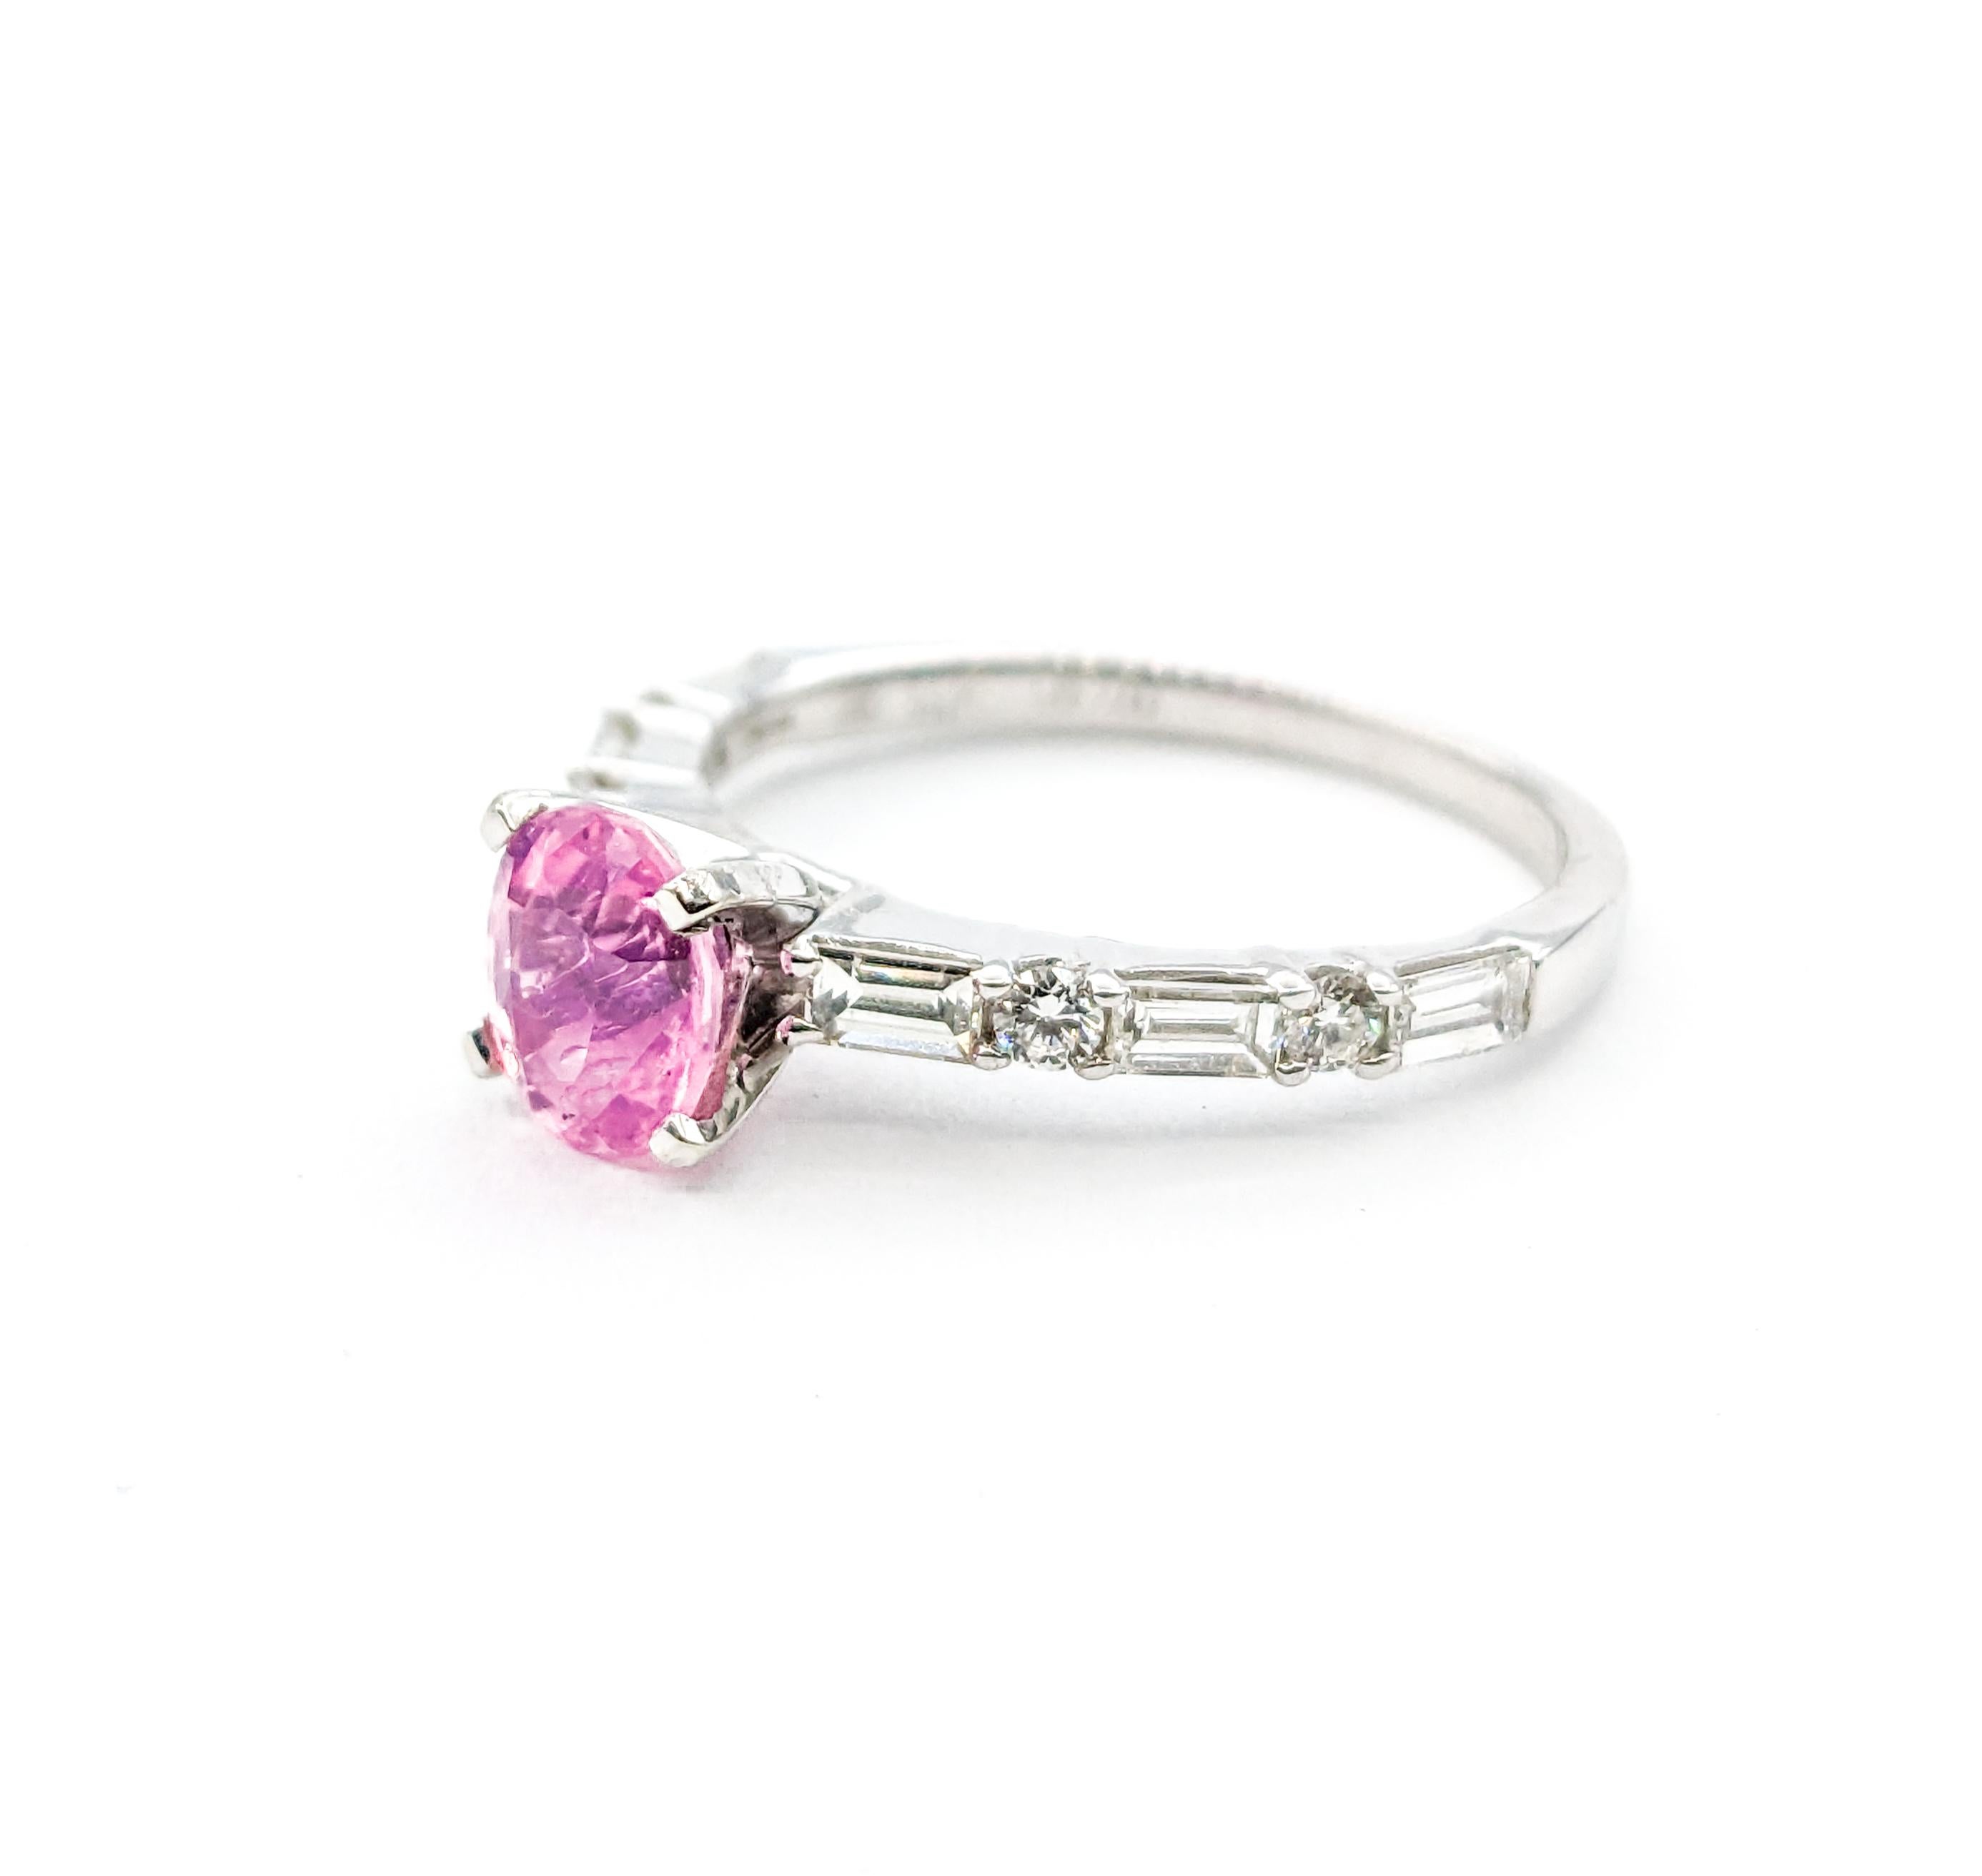 1.38ct Pink Sapphire & .62ctw Diamond Ring In White Gold

Introducing this lovely Pink Sapphire Ring, exquisitely crafted in 14k white gold. This ring celebrates a a striking 1.38ct pink sapphire with a bright saturated color. The band features